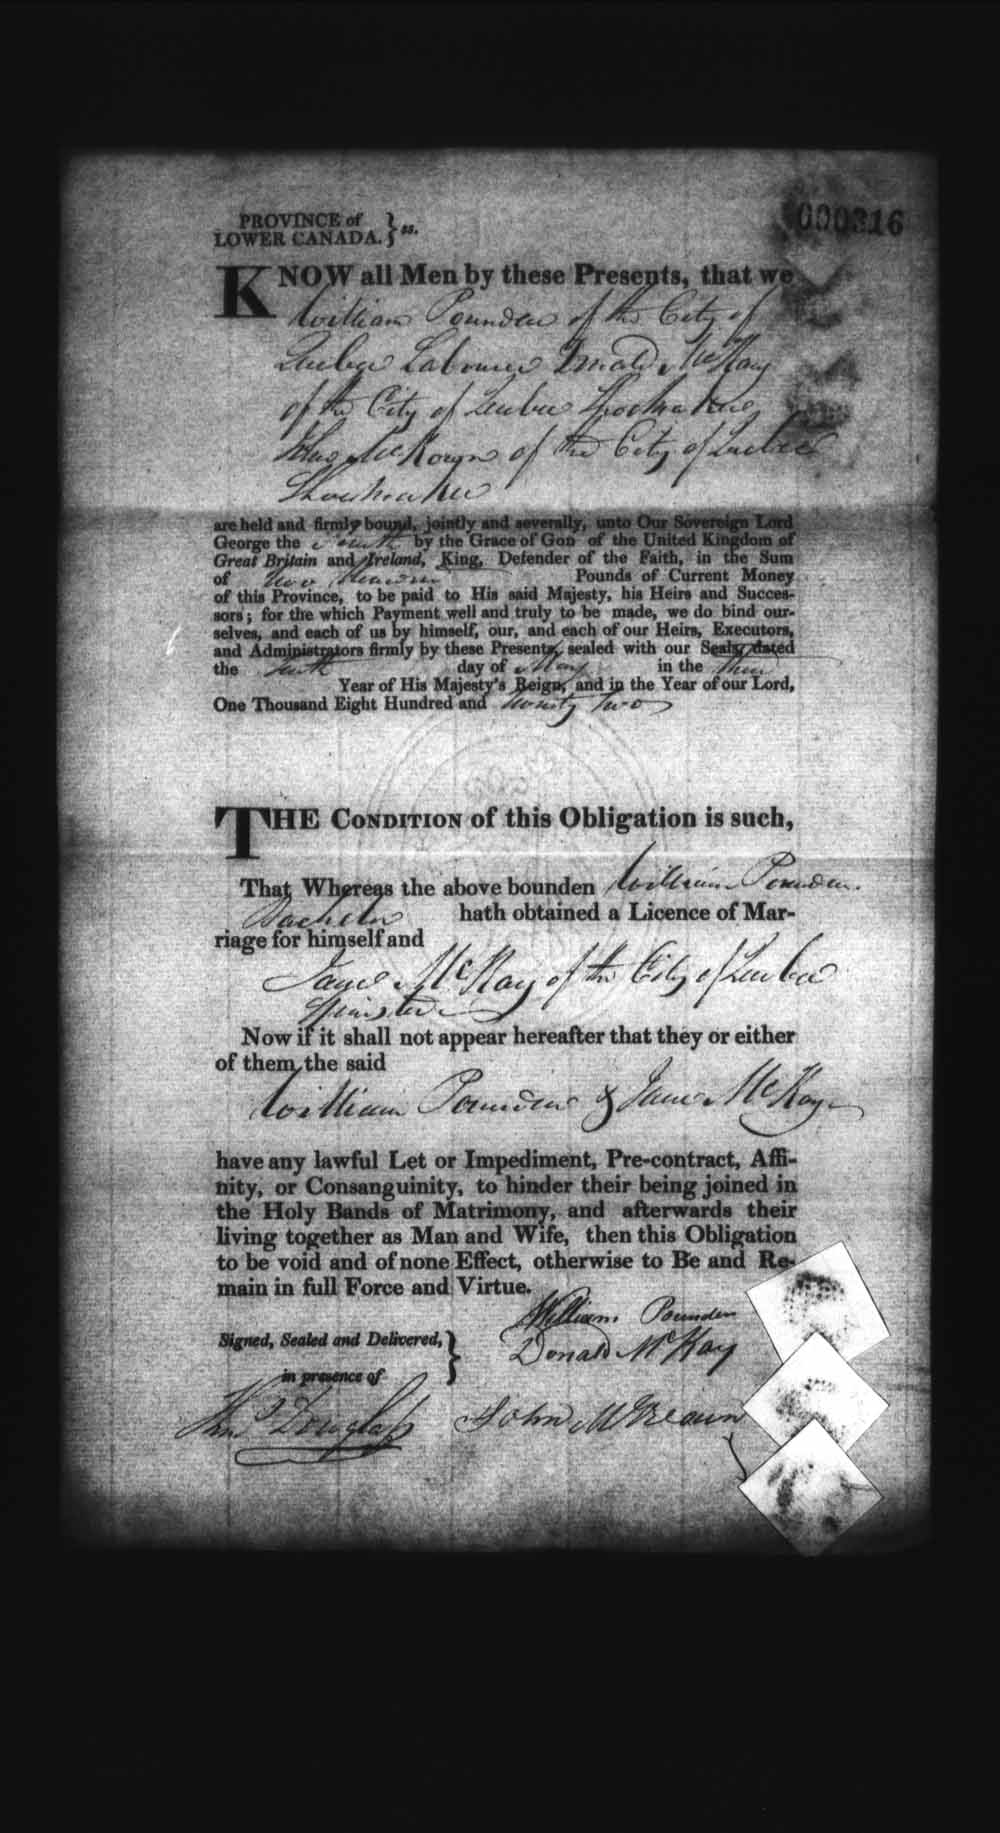 Digitized page of Upper and Lower Canada Marriage Bonds (1779-1865) for Image No.: e008236194